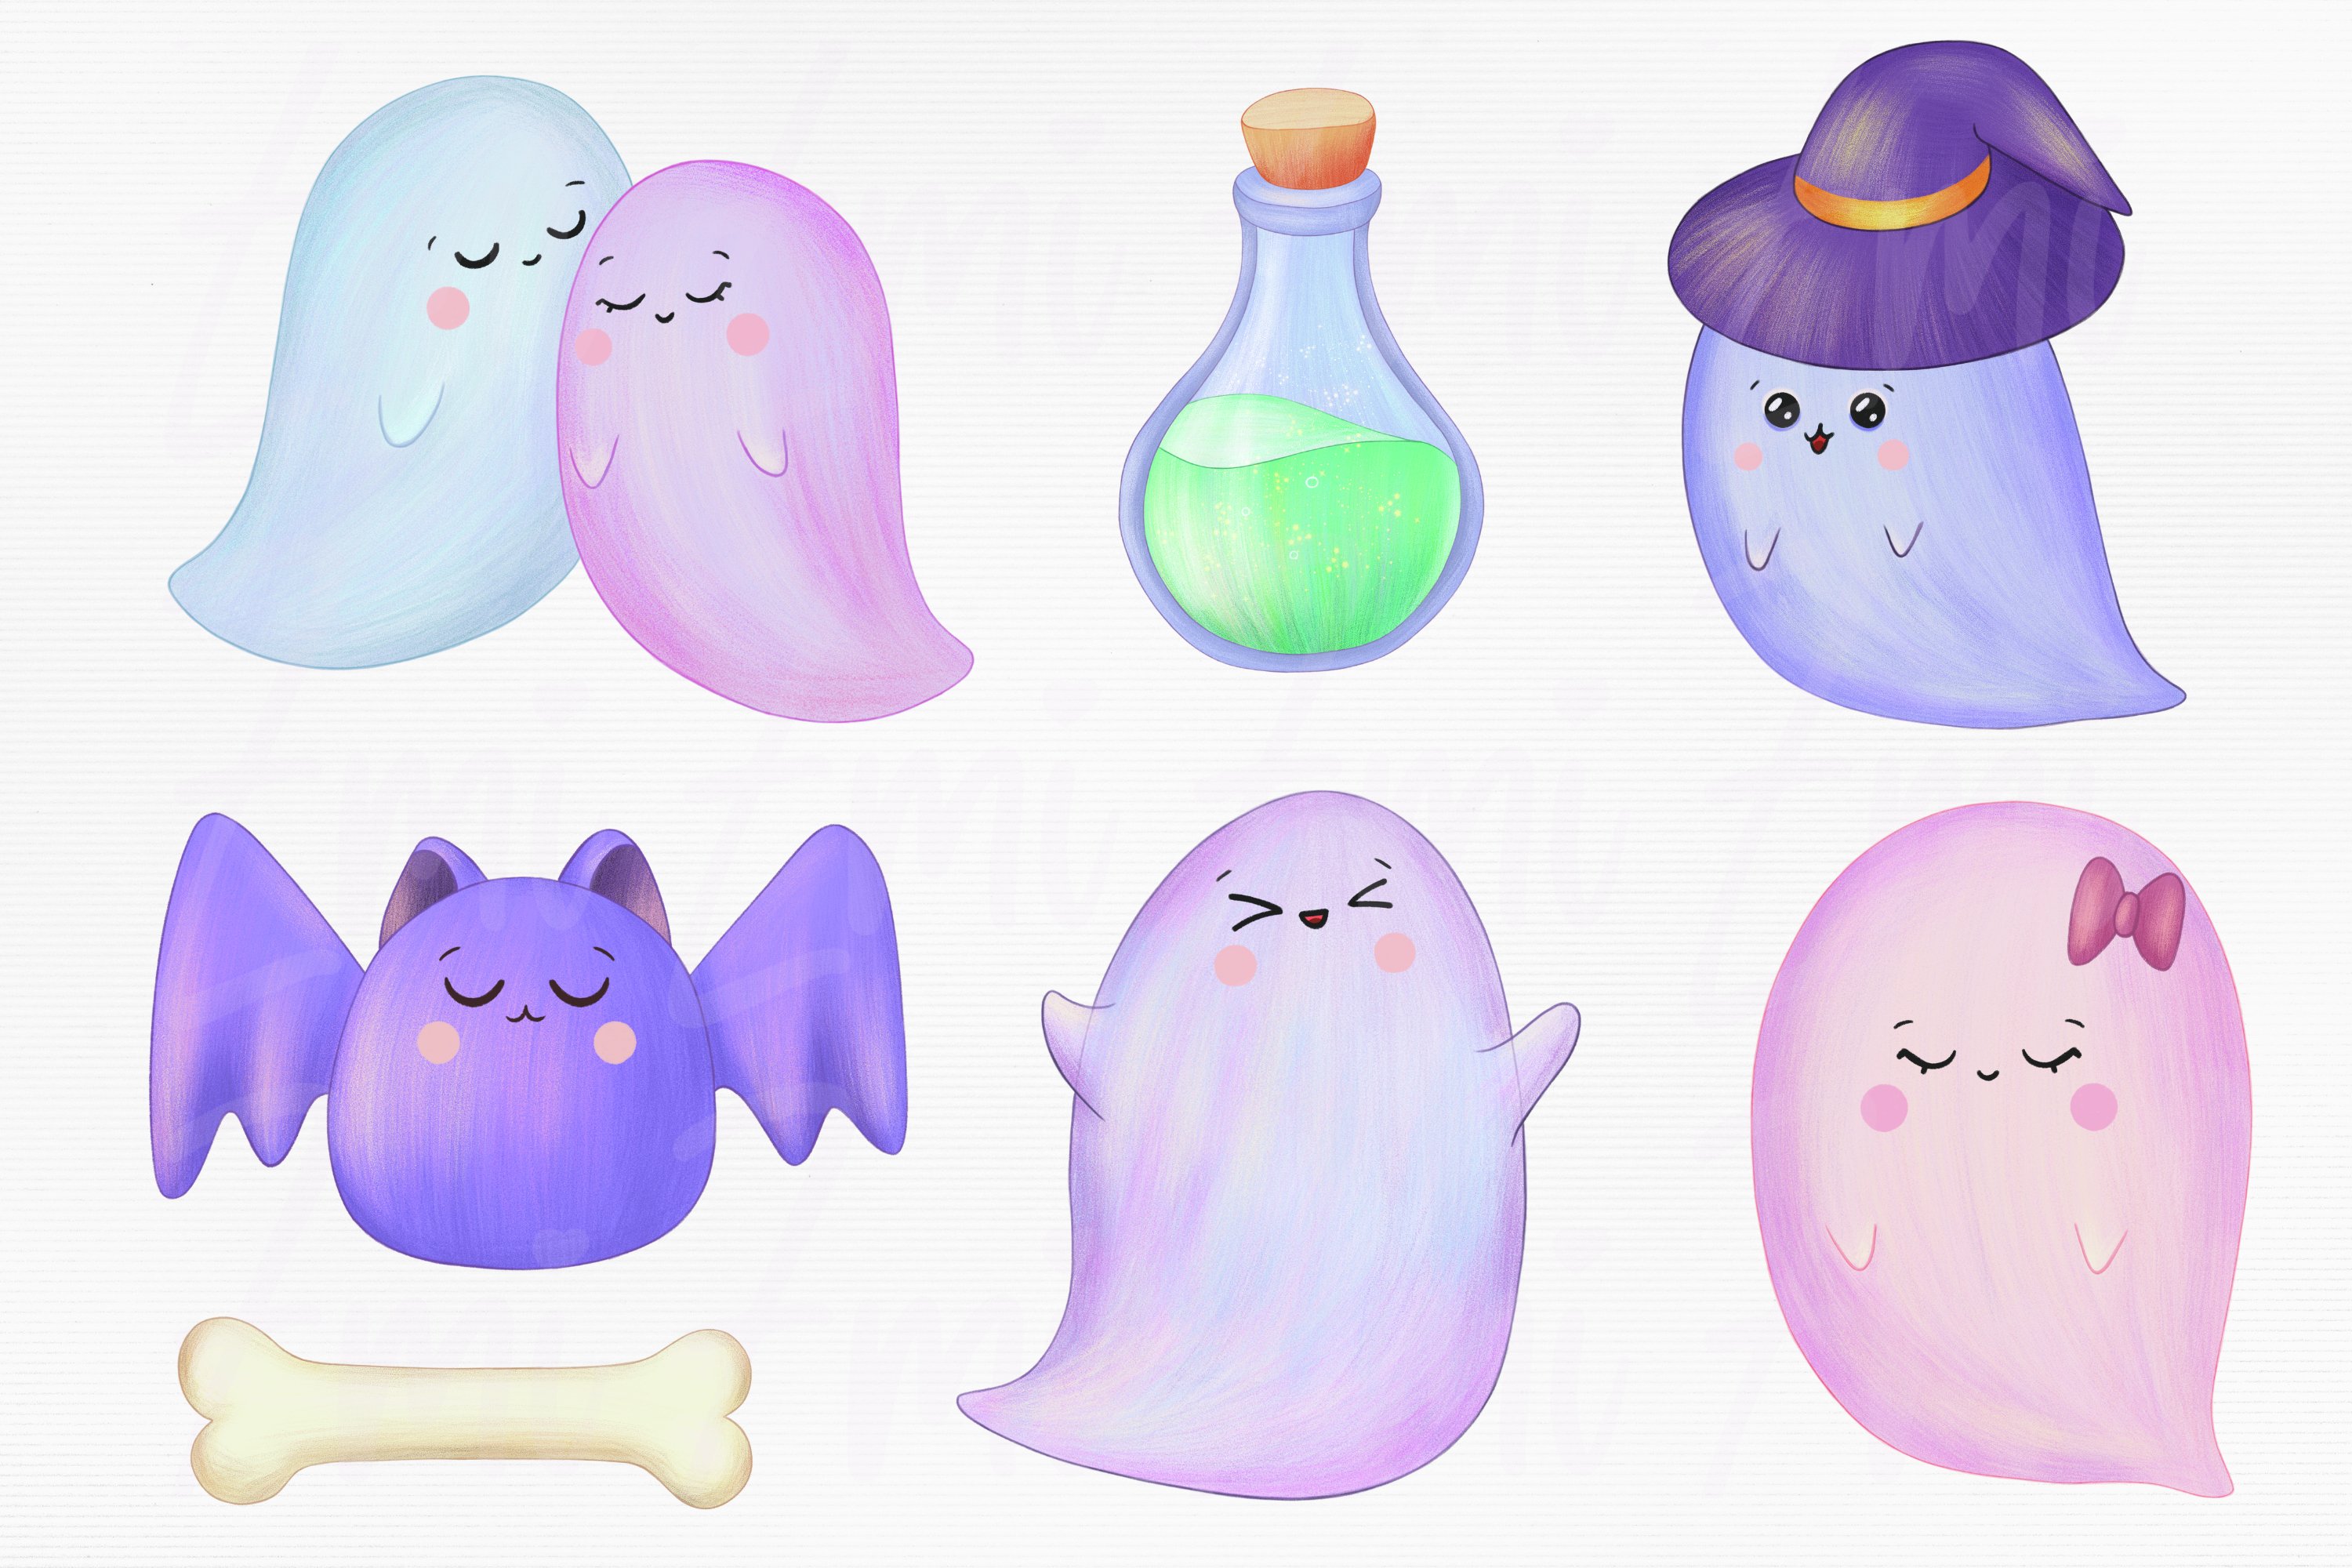 6 different cute halloween illustrations on a gray background.